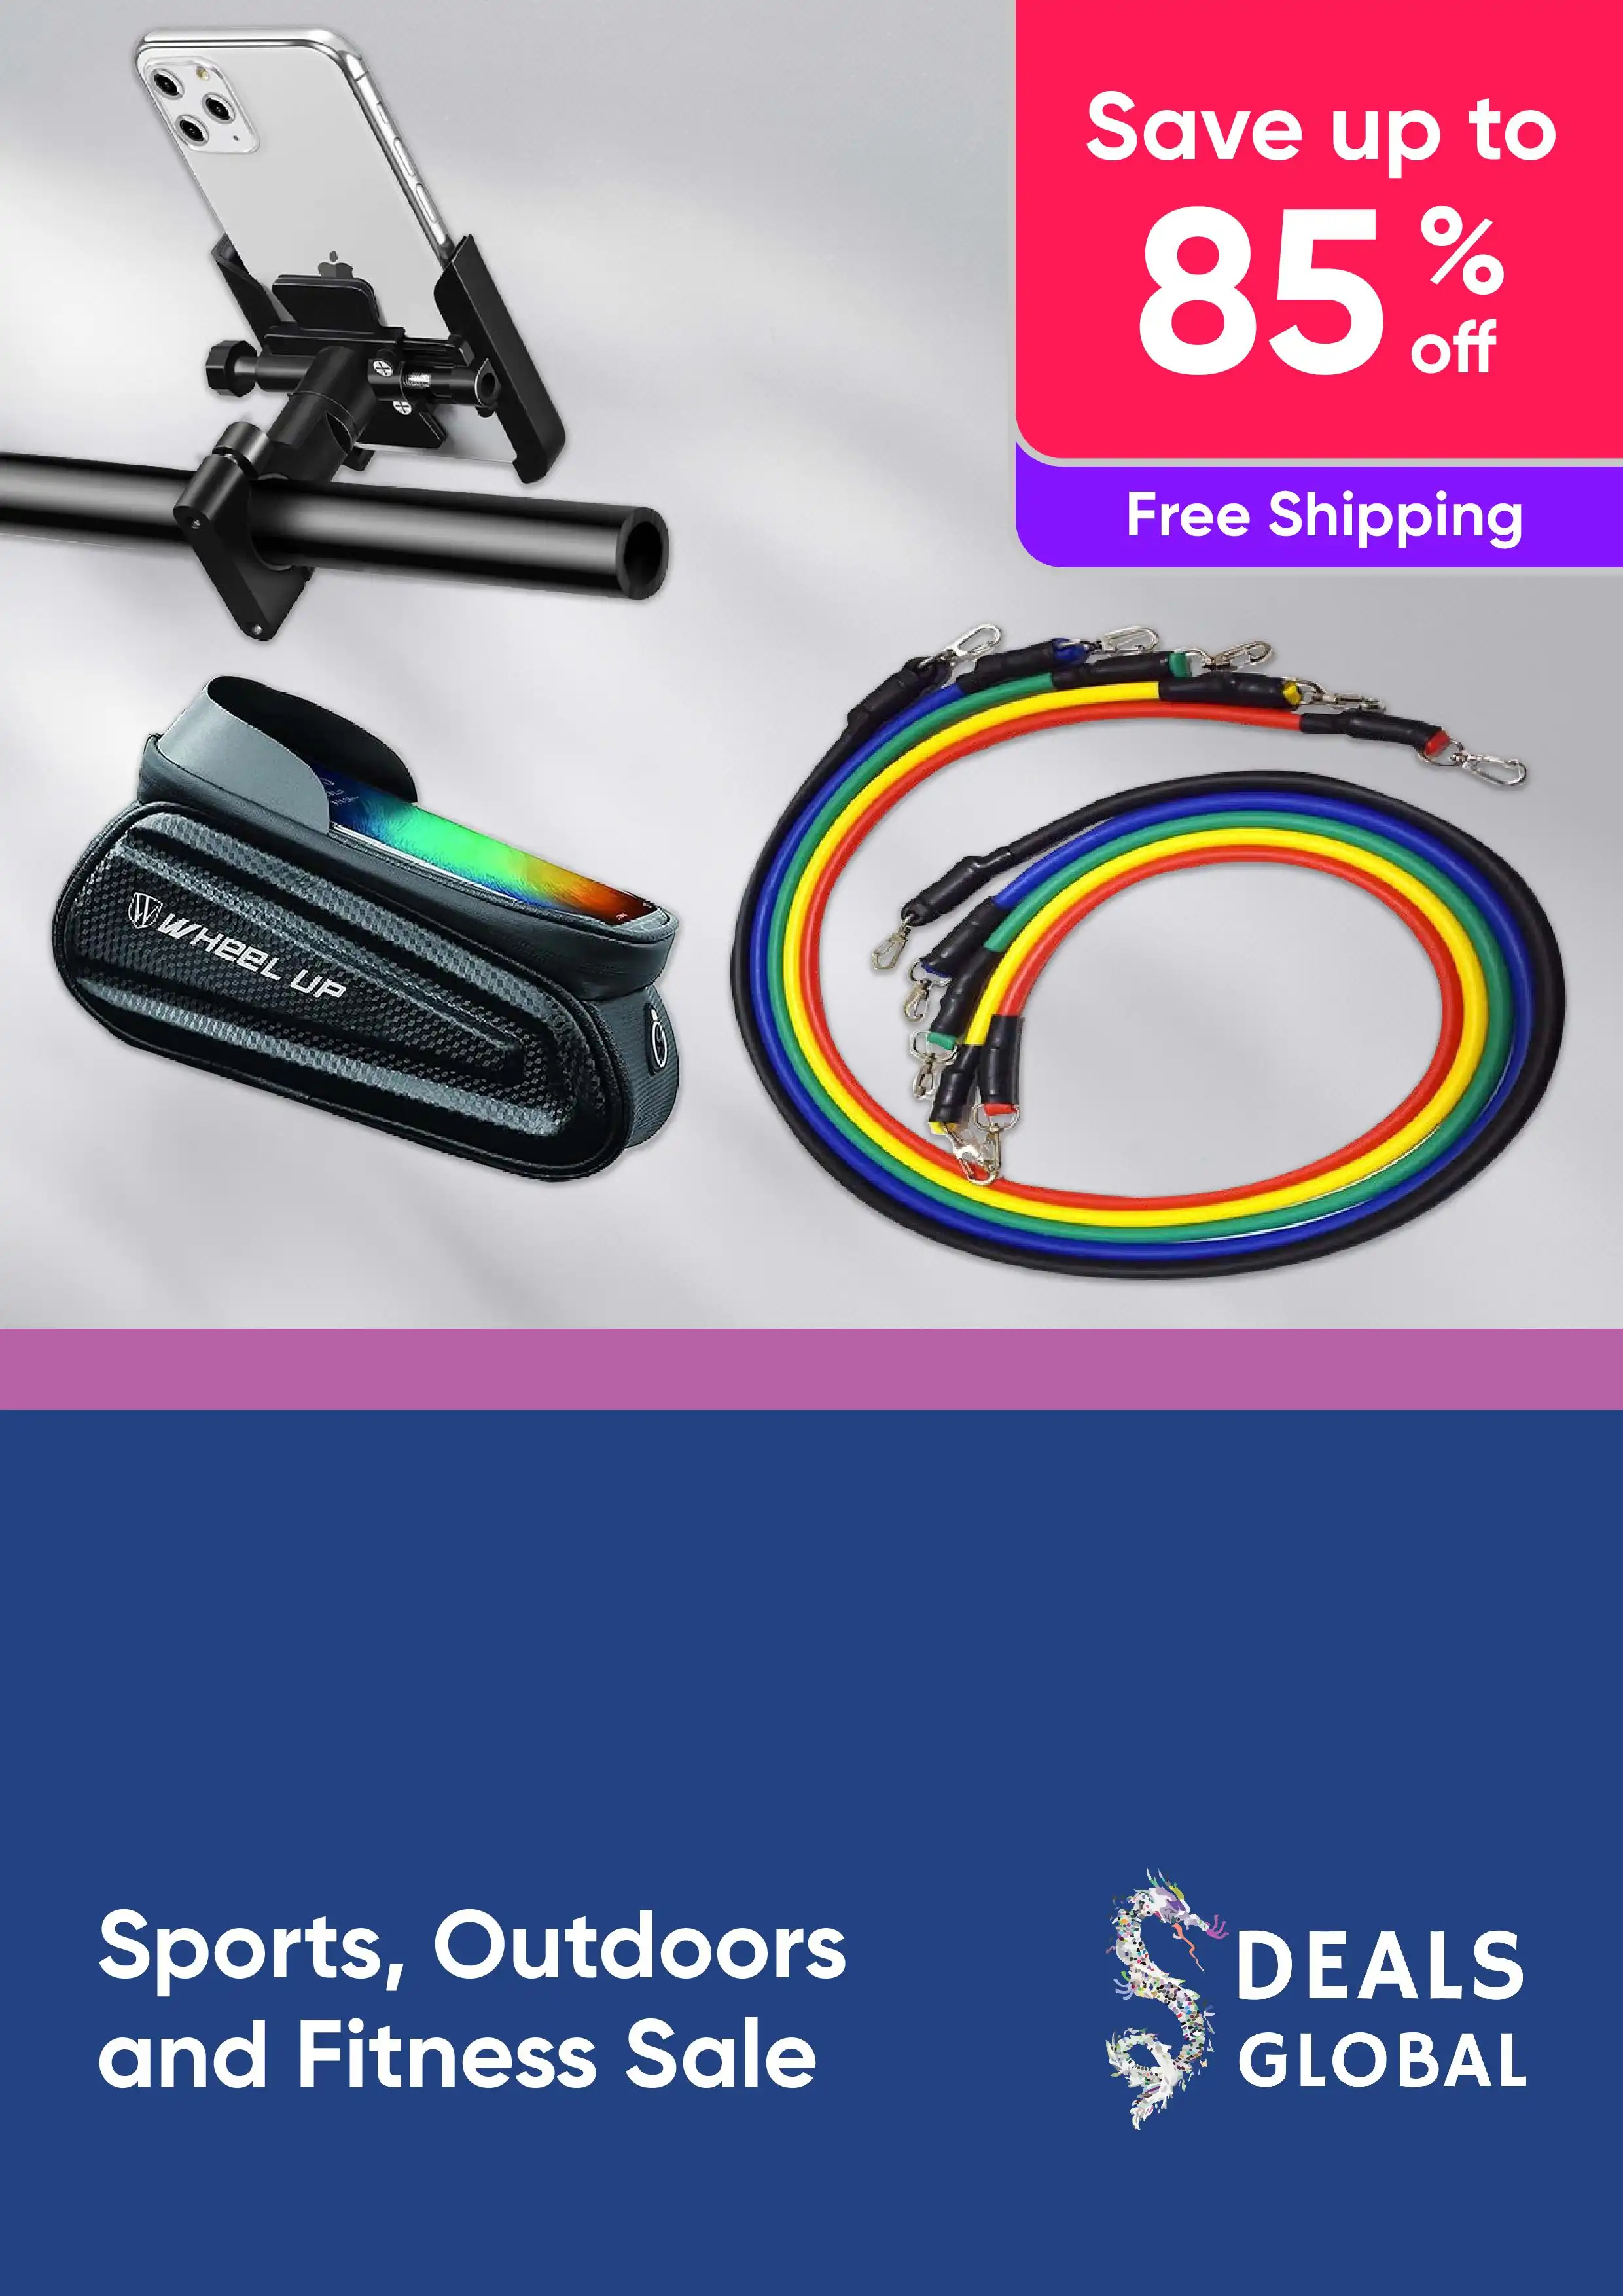 Sports, Outdoors and Fitness Sale - Save Up to 85% Off